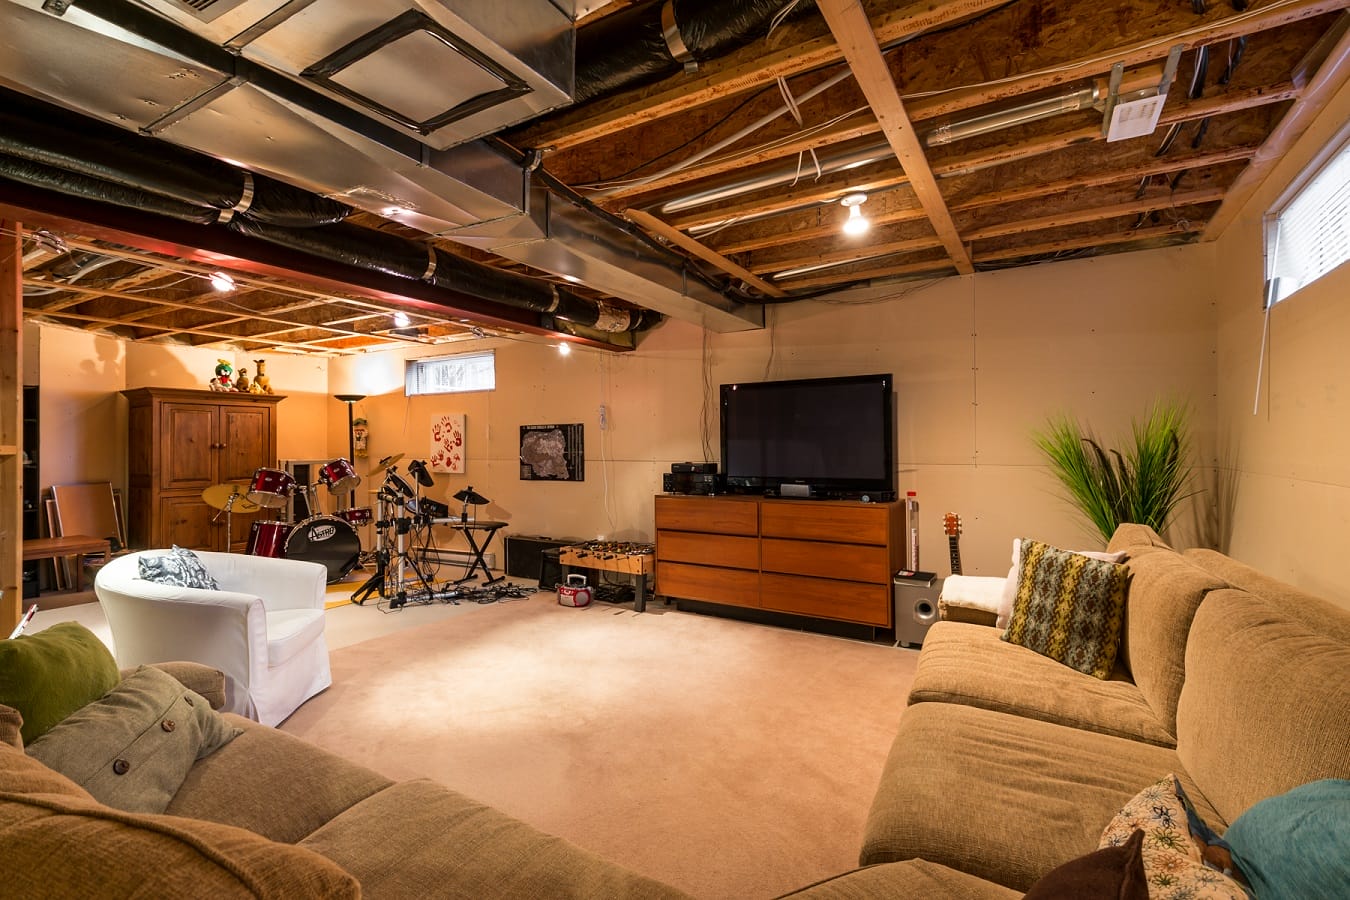 How To Cool A Basement Without AC